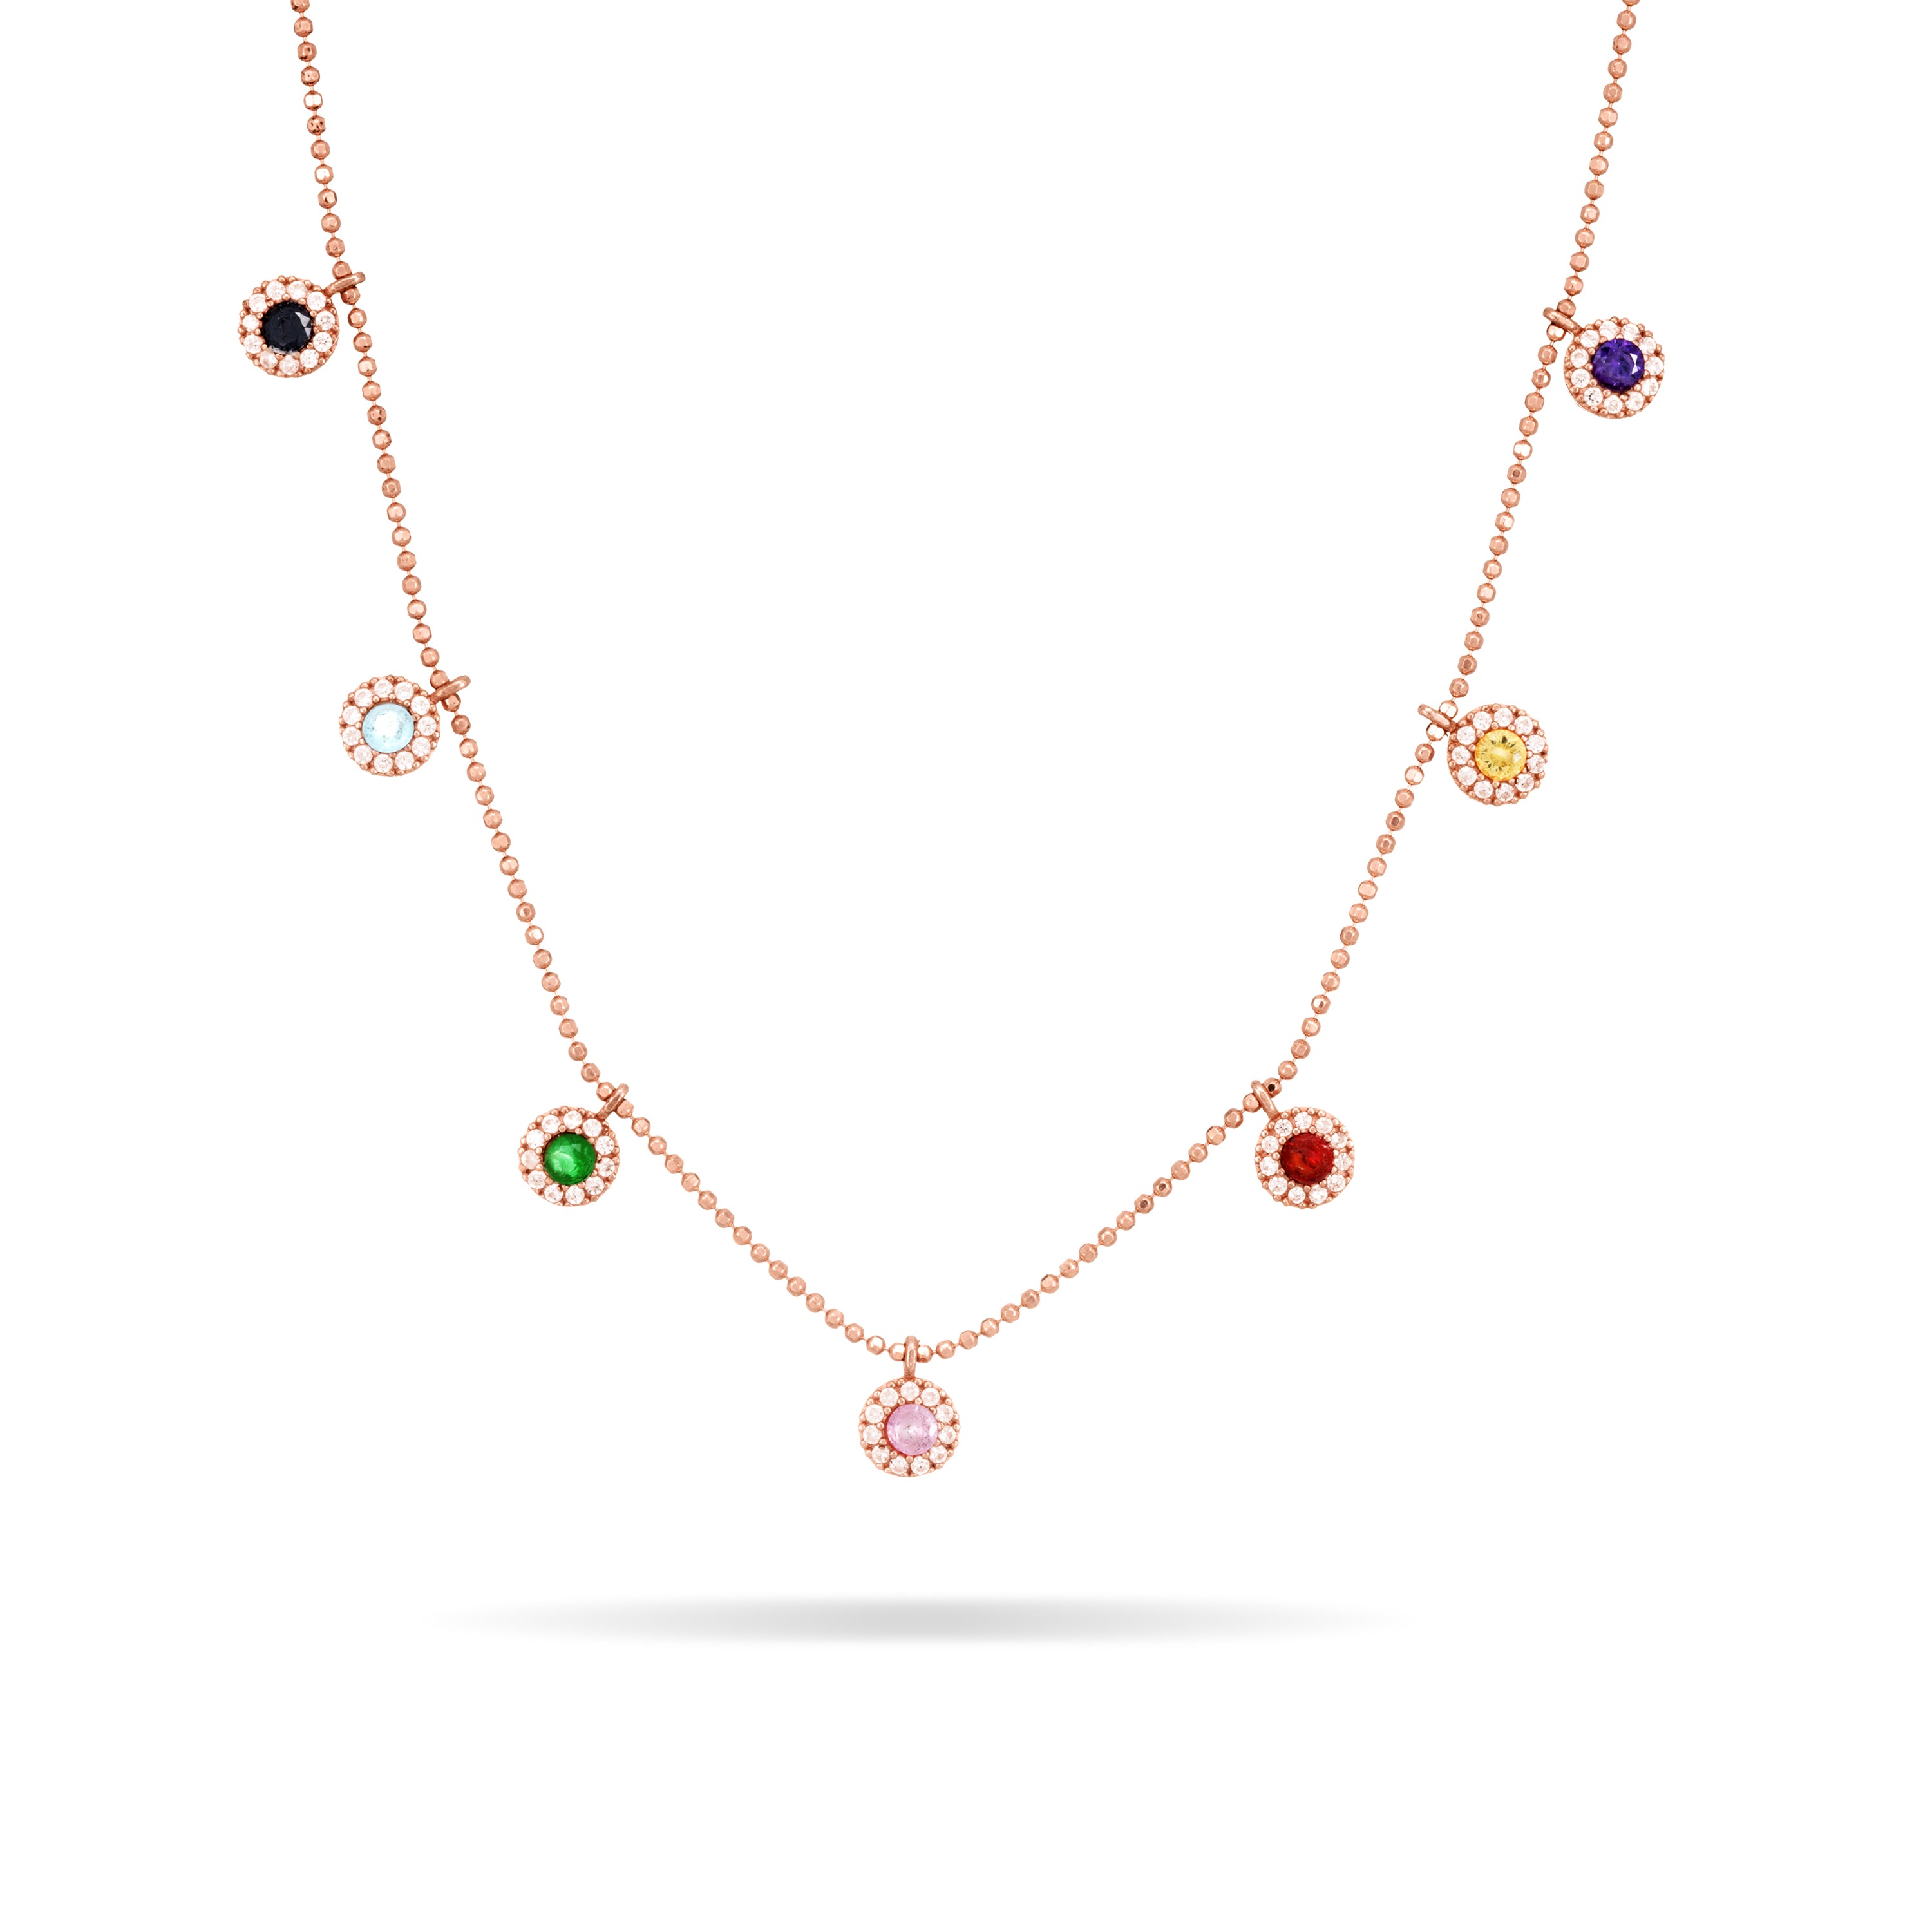 Round Droplets Link Chain Necklace